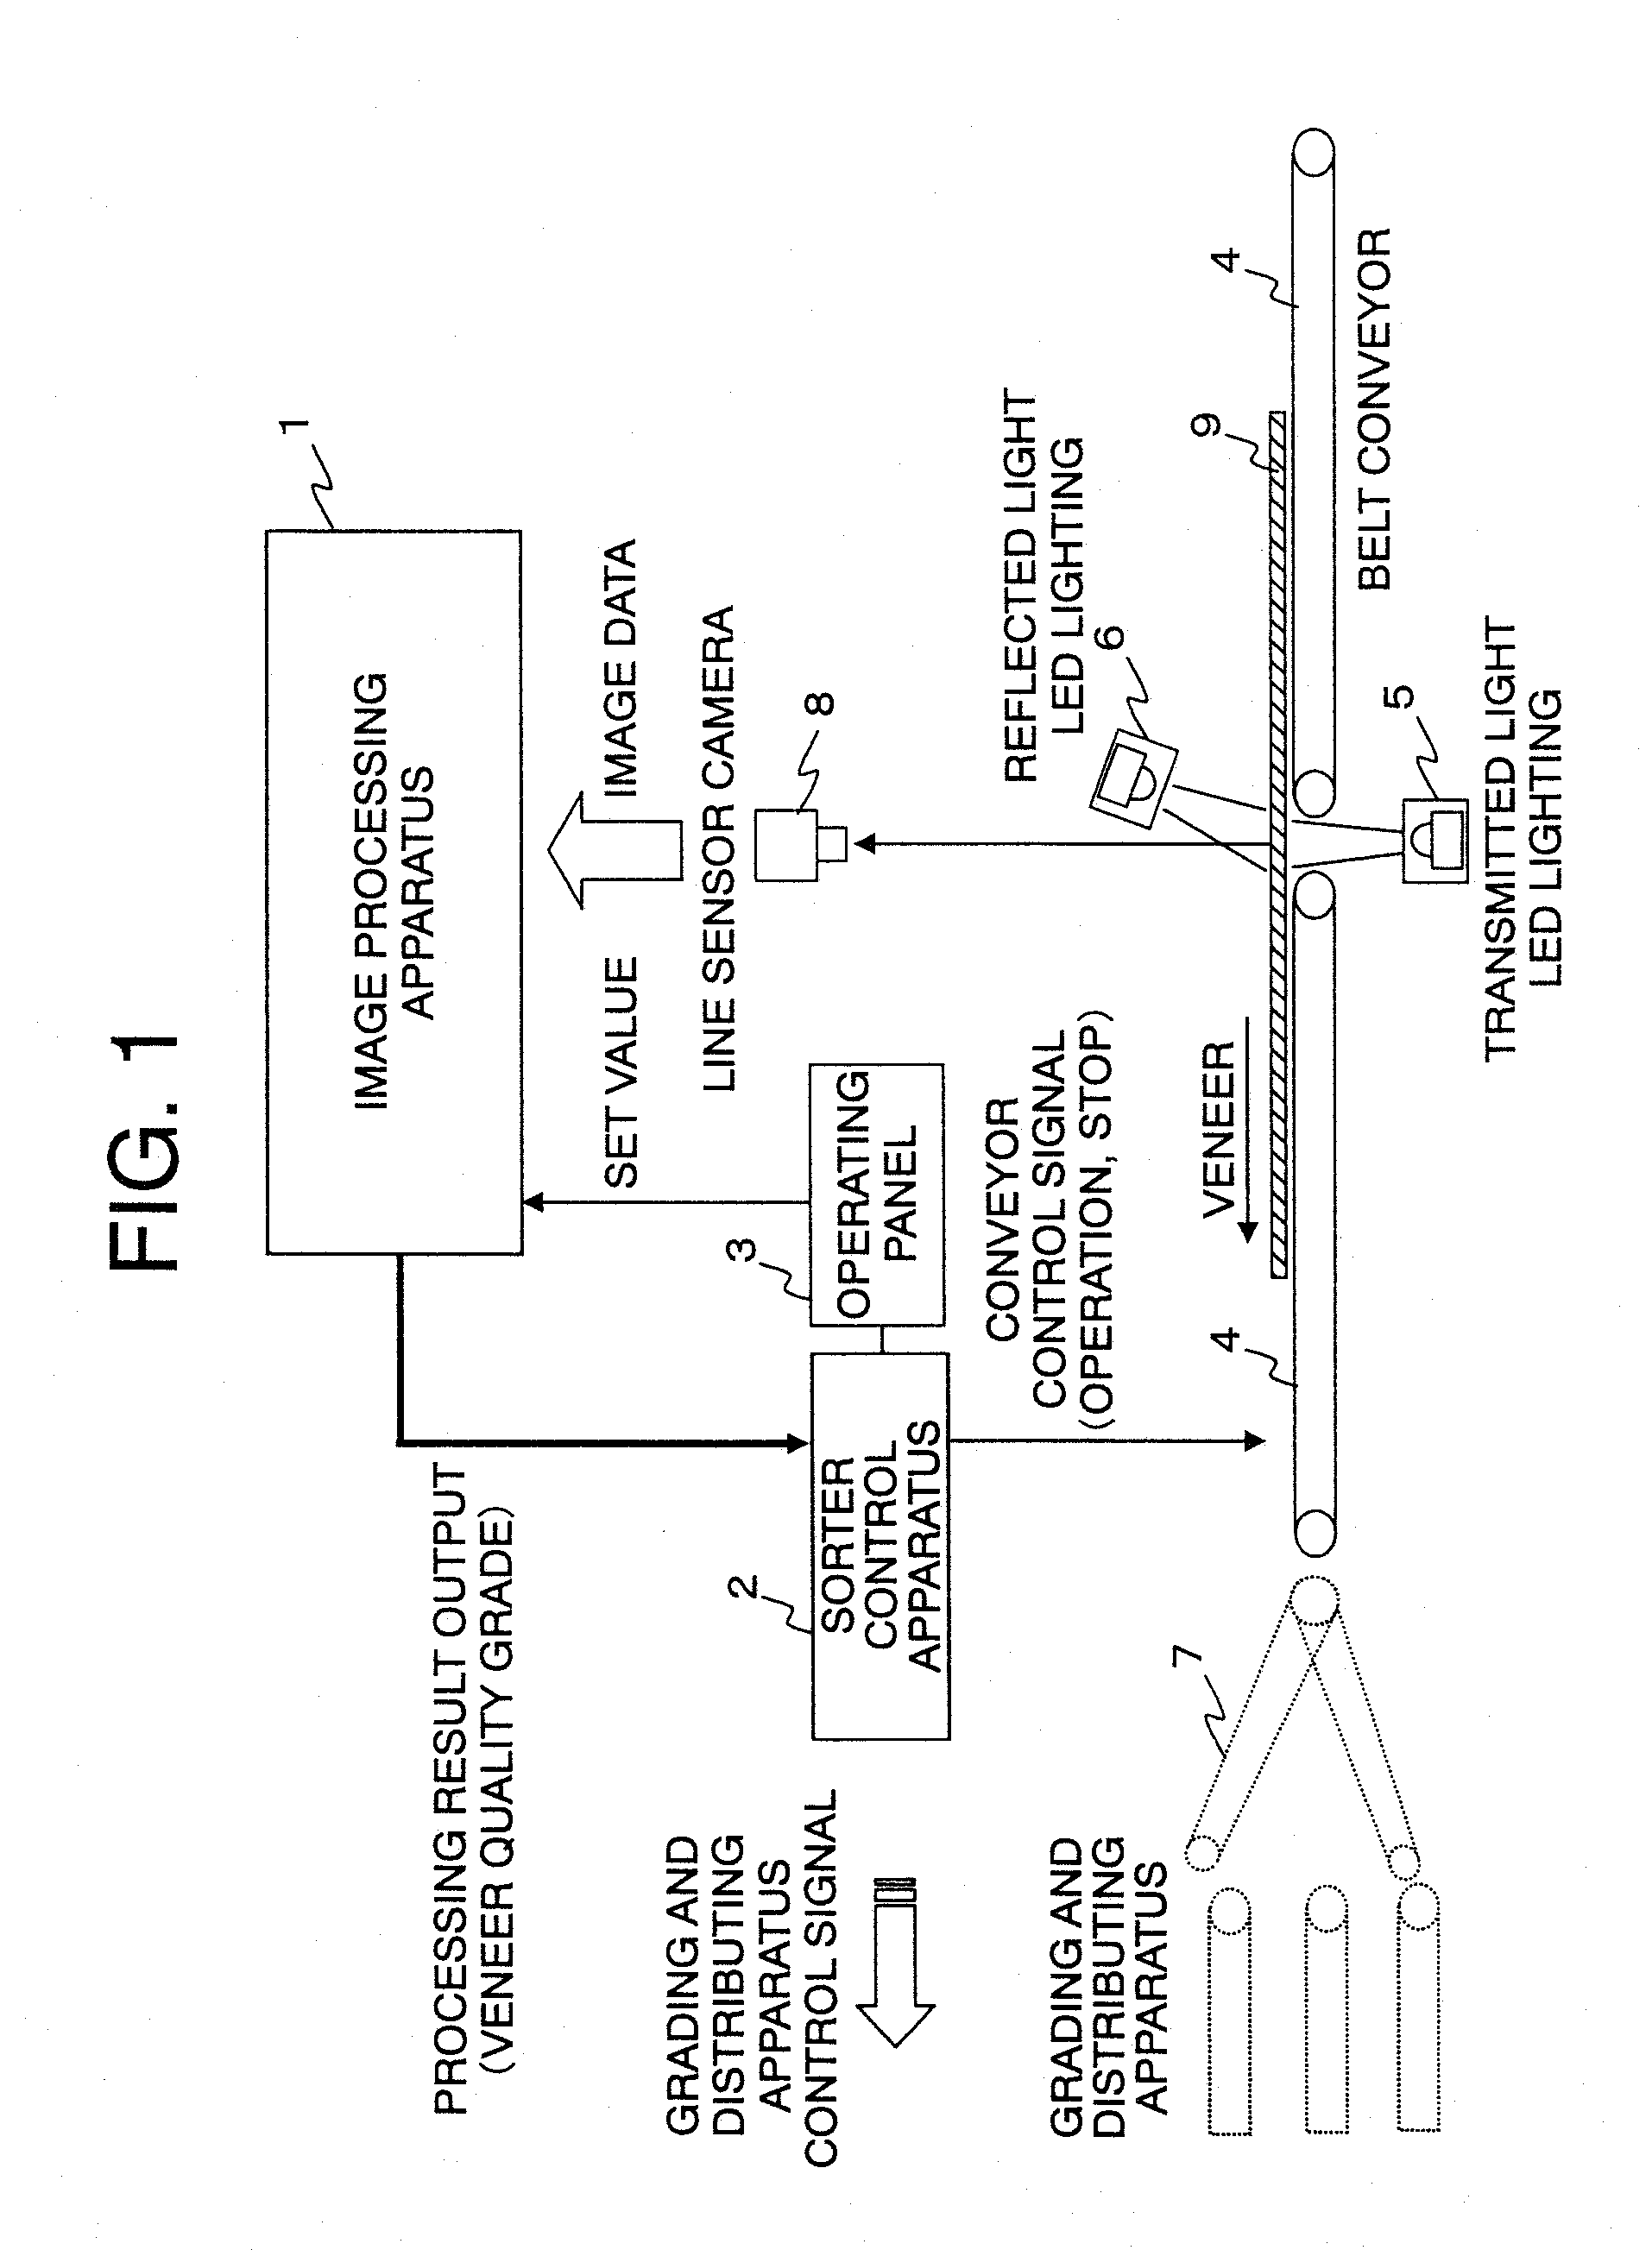 Method, apparatus and program product for searching knots in wood